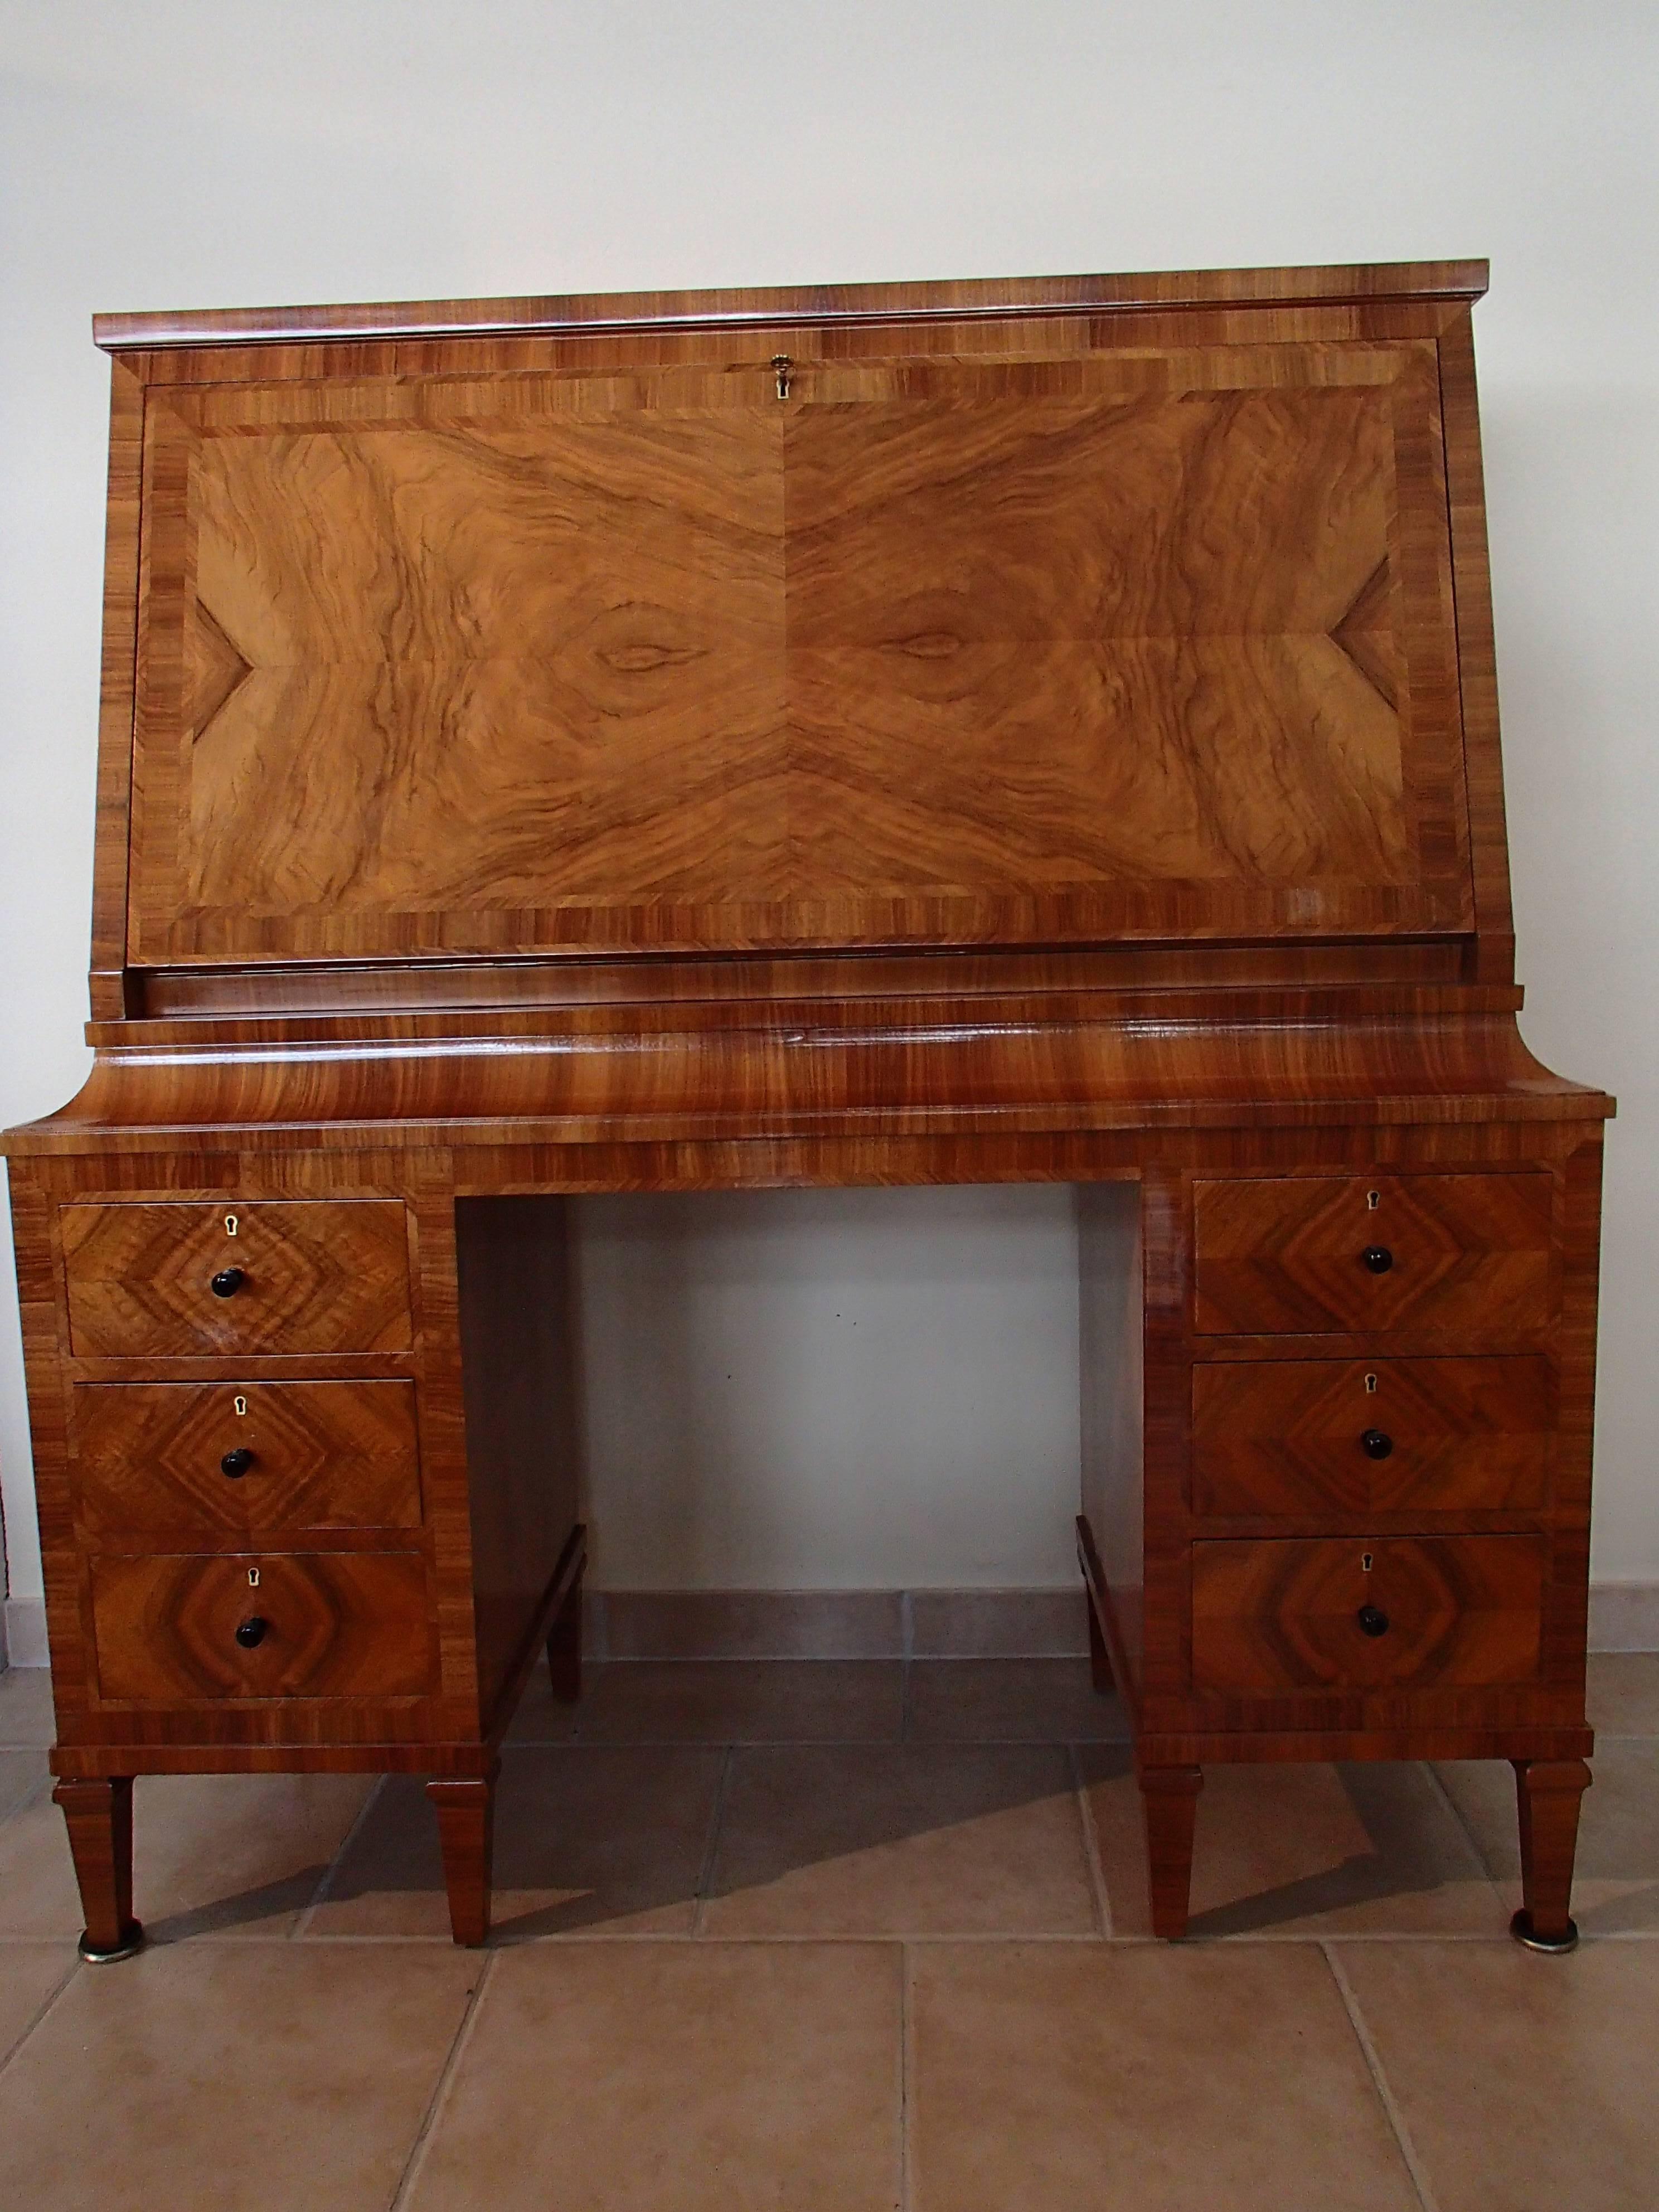 1920 walnut secretaire with 16 drawers and leather desk, comes in two parts completely restored with shellac.